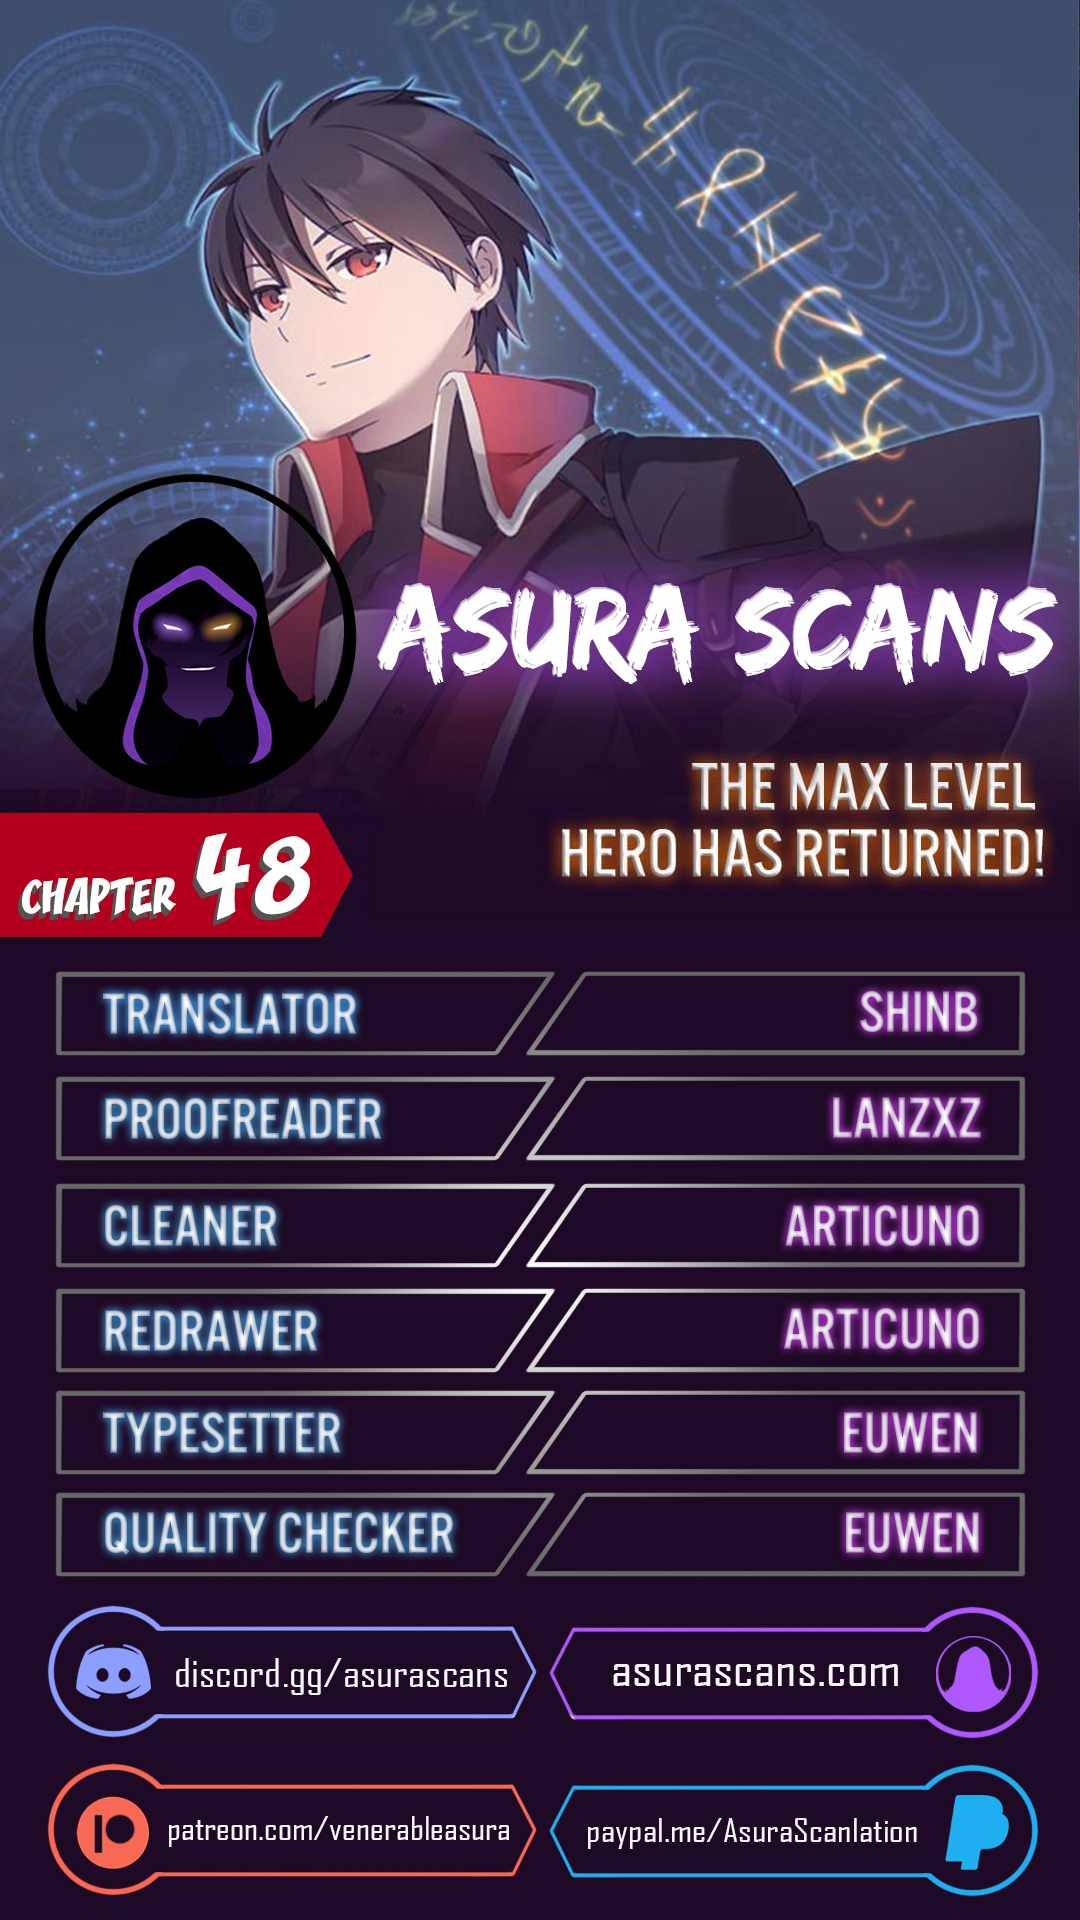 The MAX leveled hero will return! Chapter 48